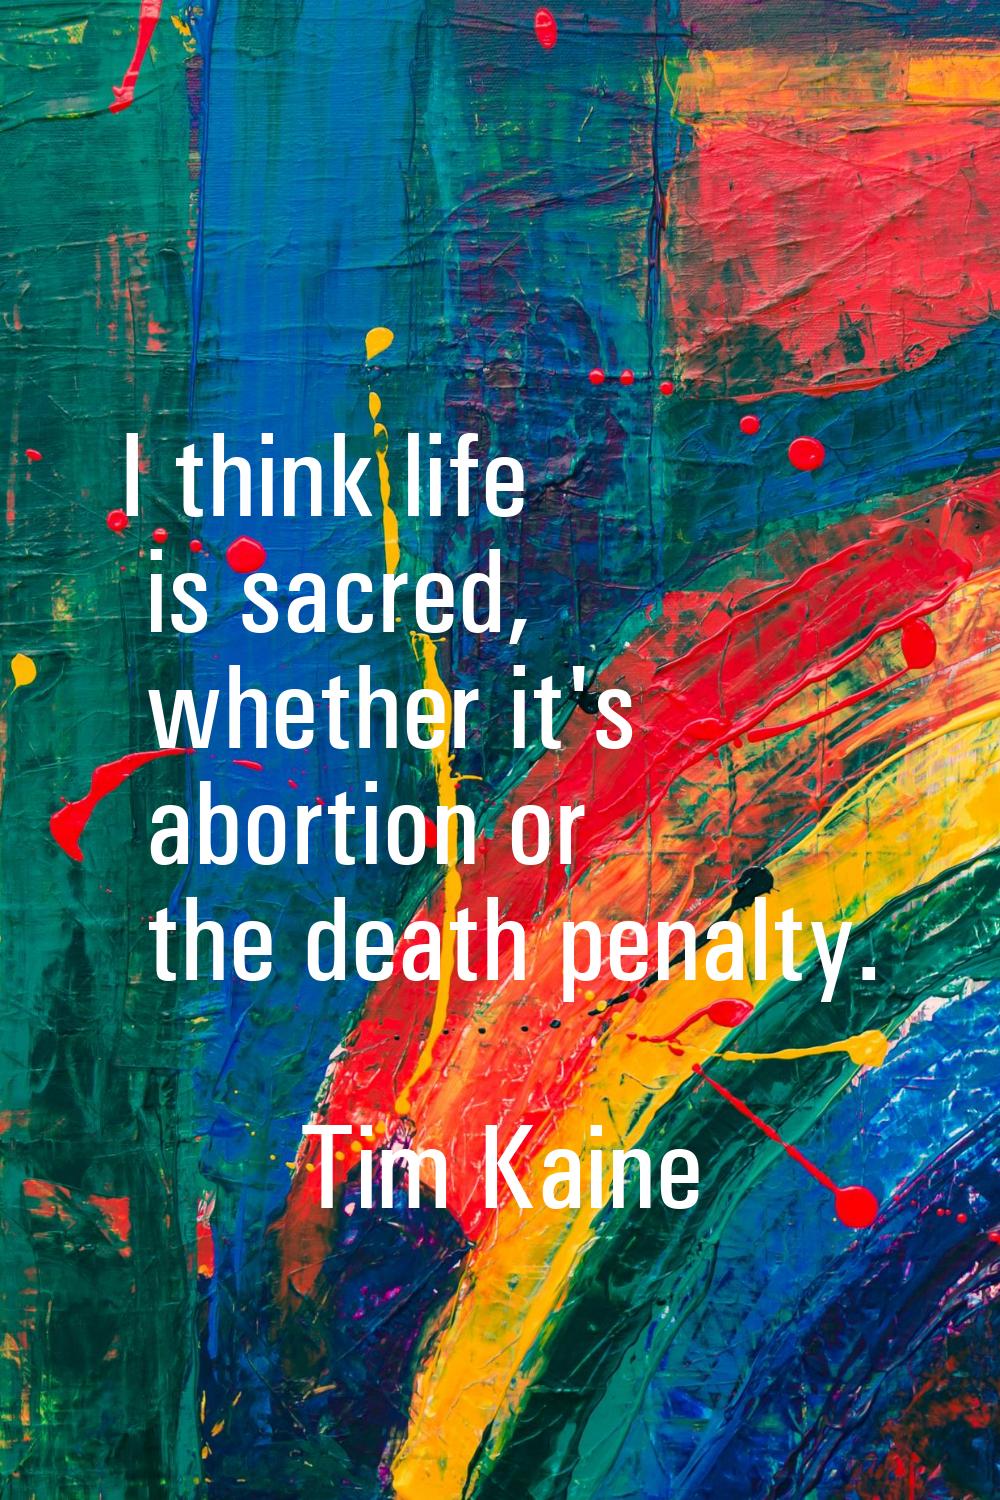 I think life is sacred, whether it's abortion or the death penalty.